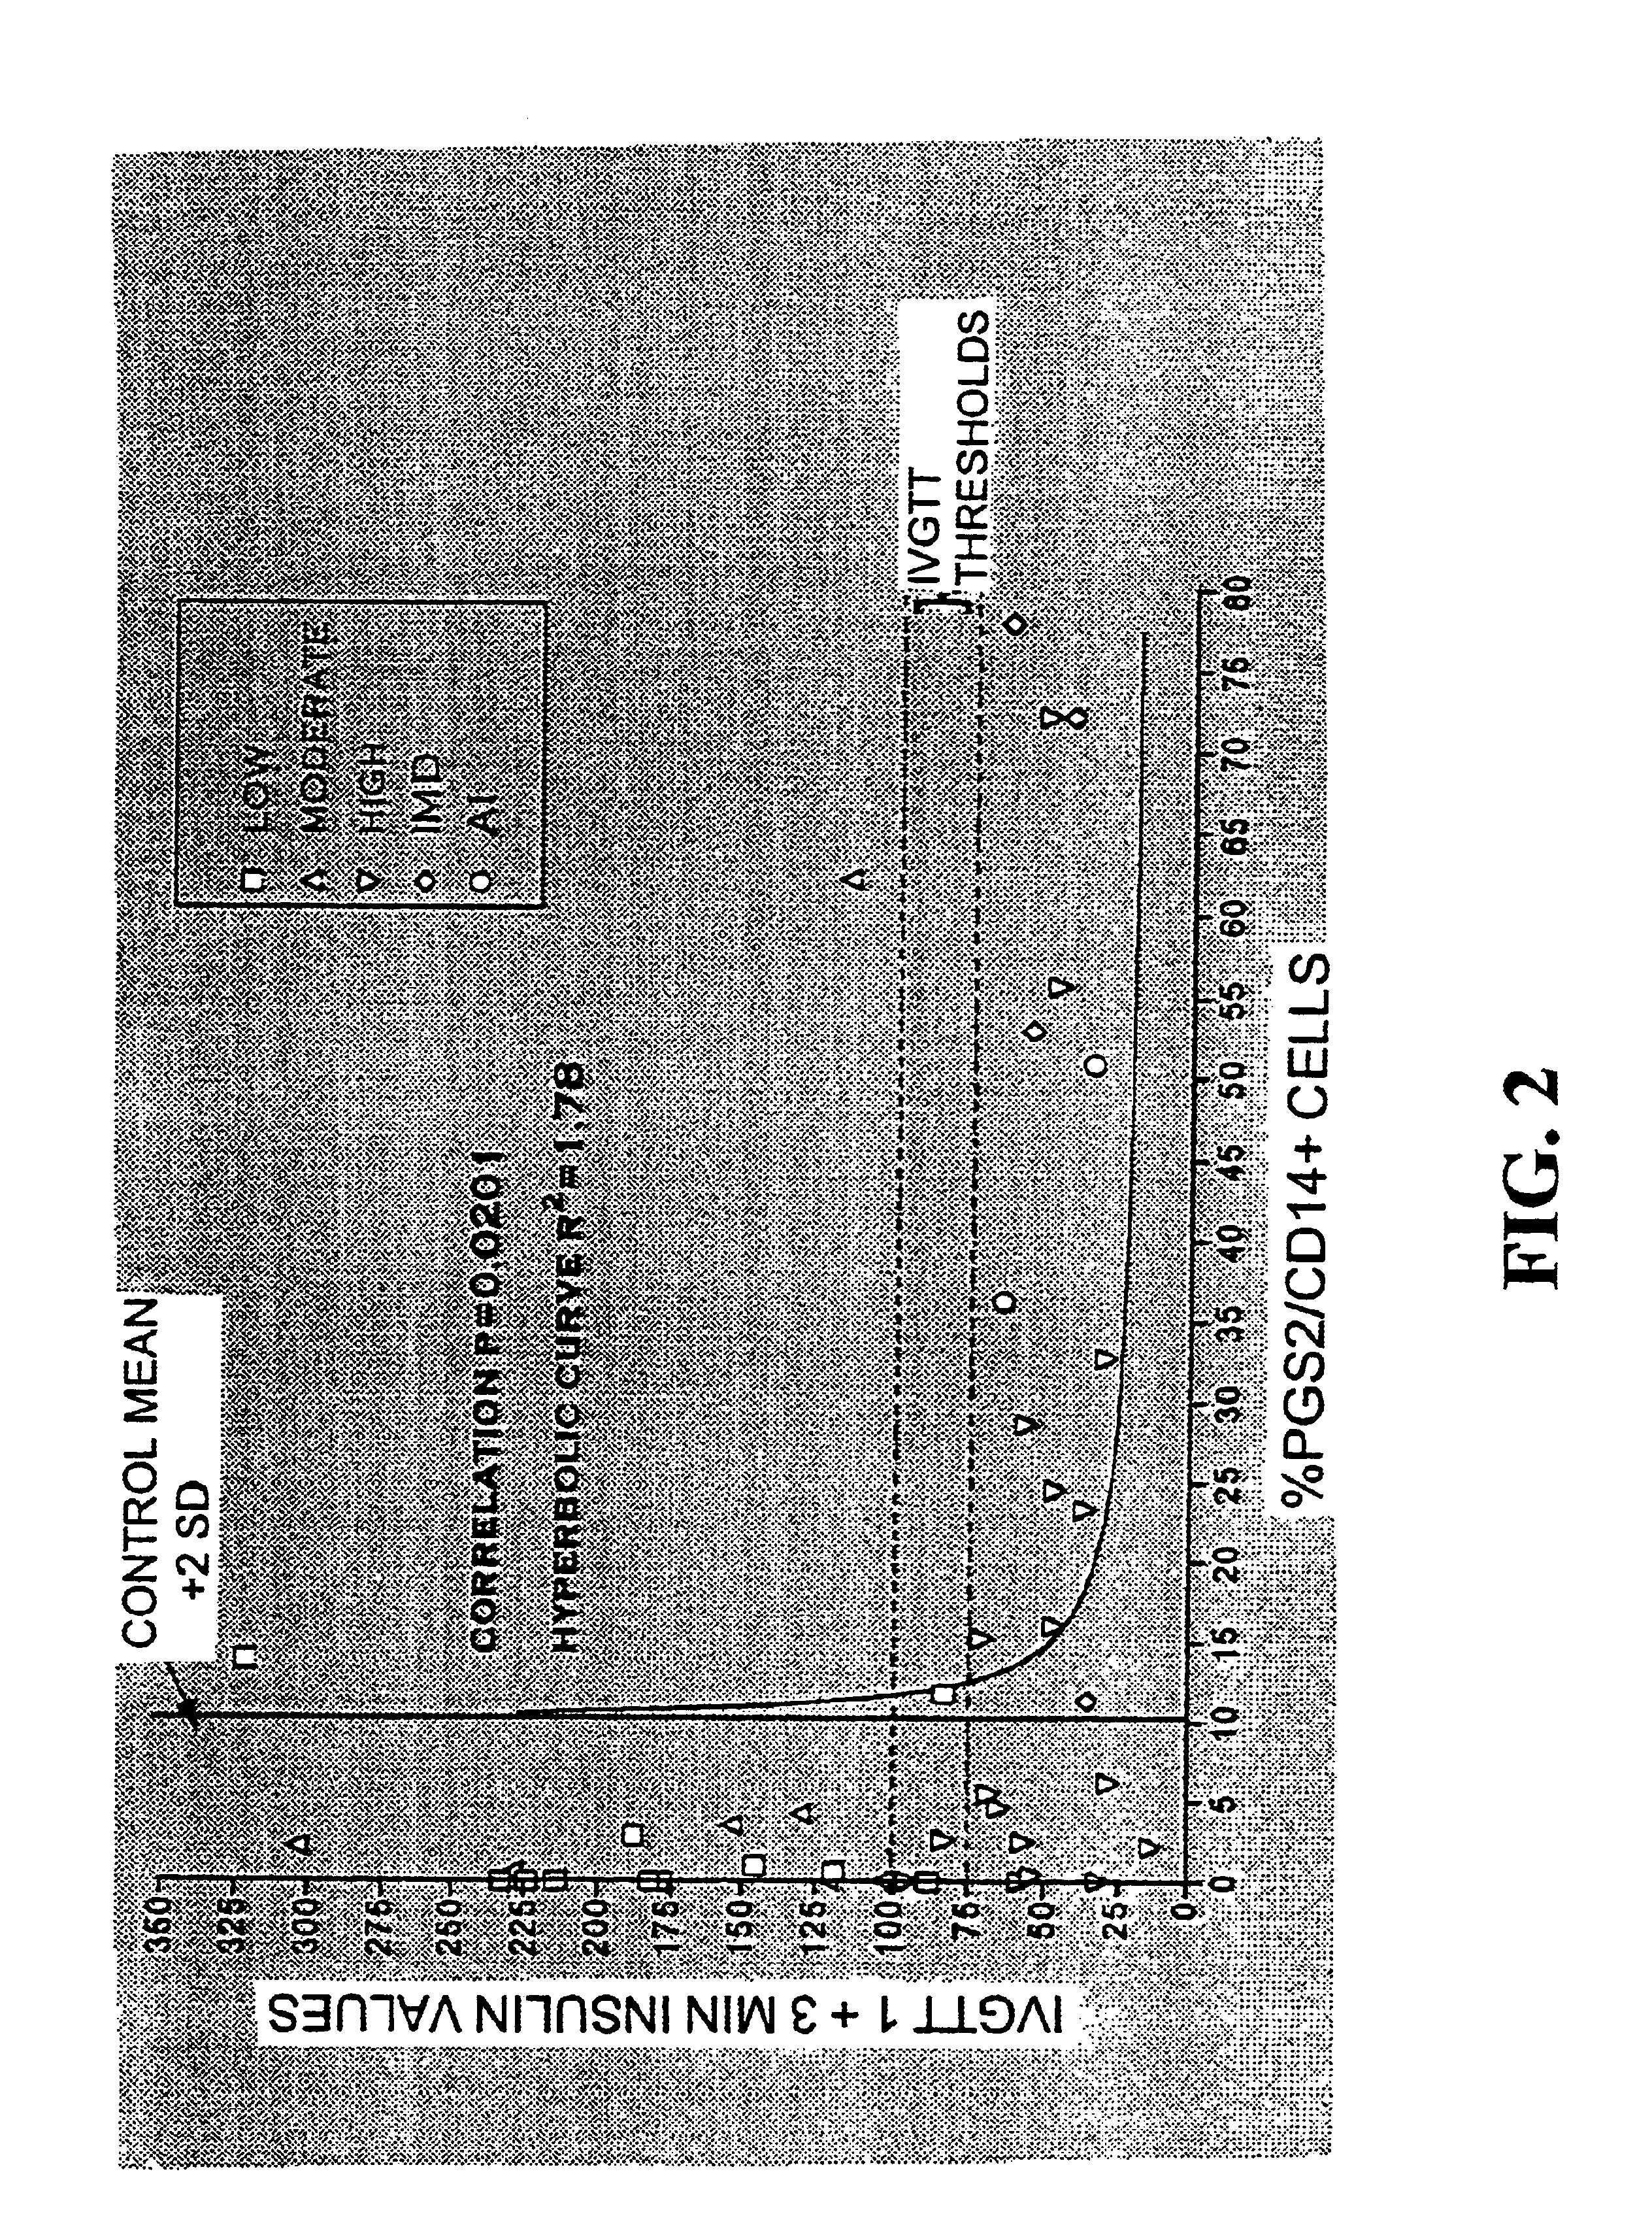 Materials and methods for detection and treatment of immune system dysfunctions